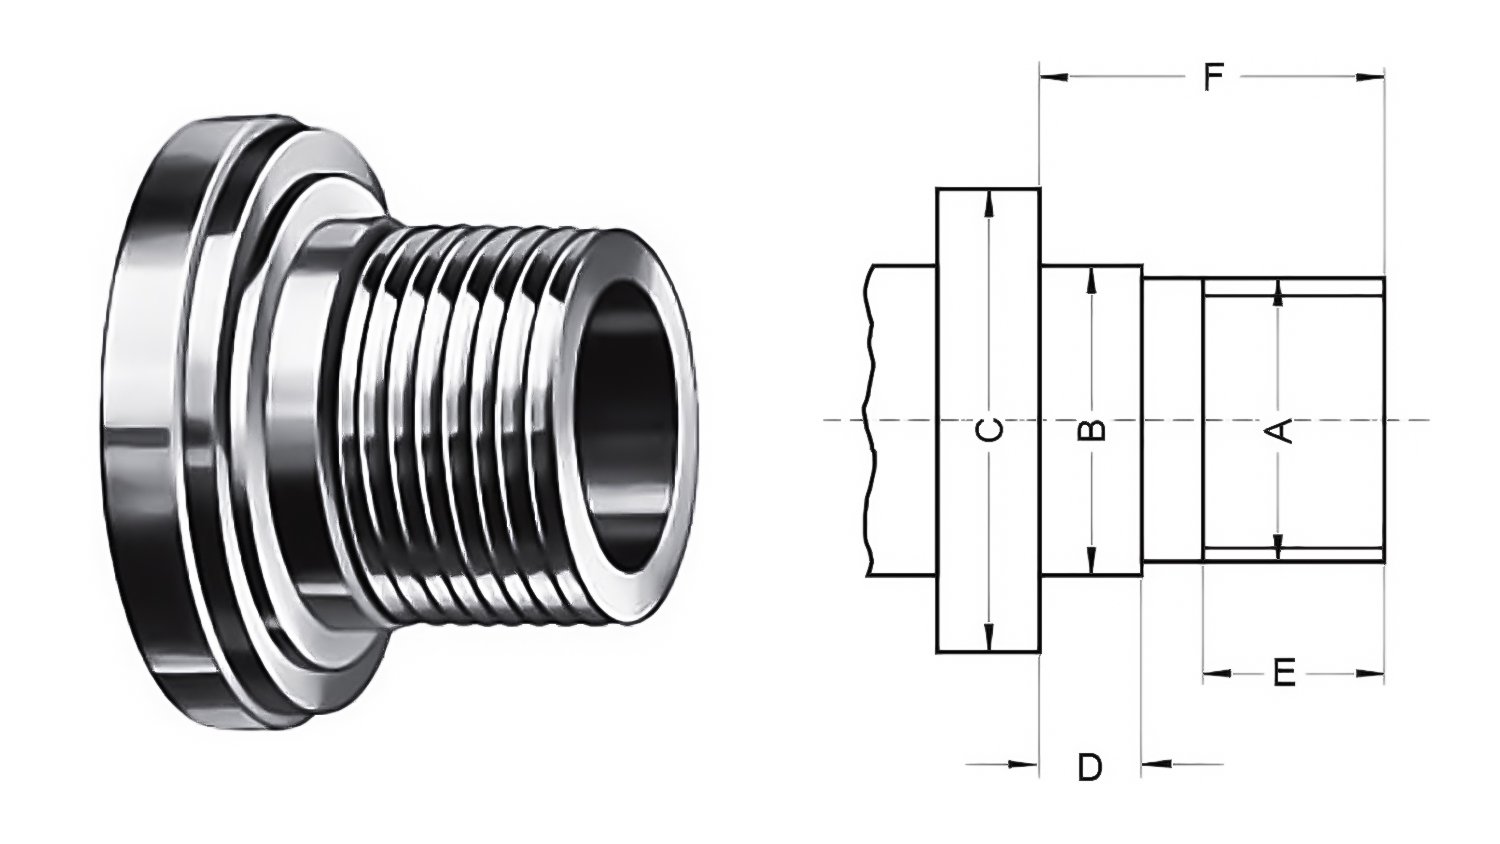 lathe-spindle-nose-mounting-threaded